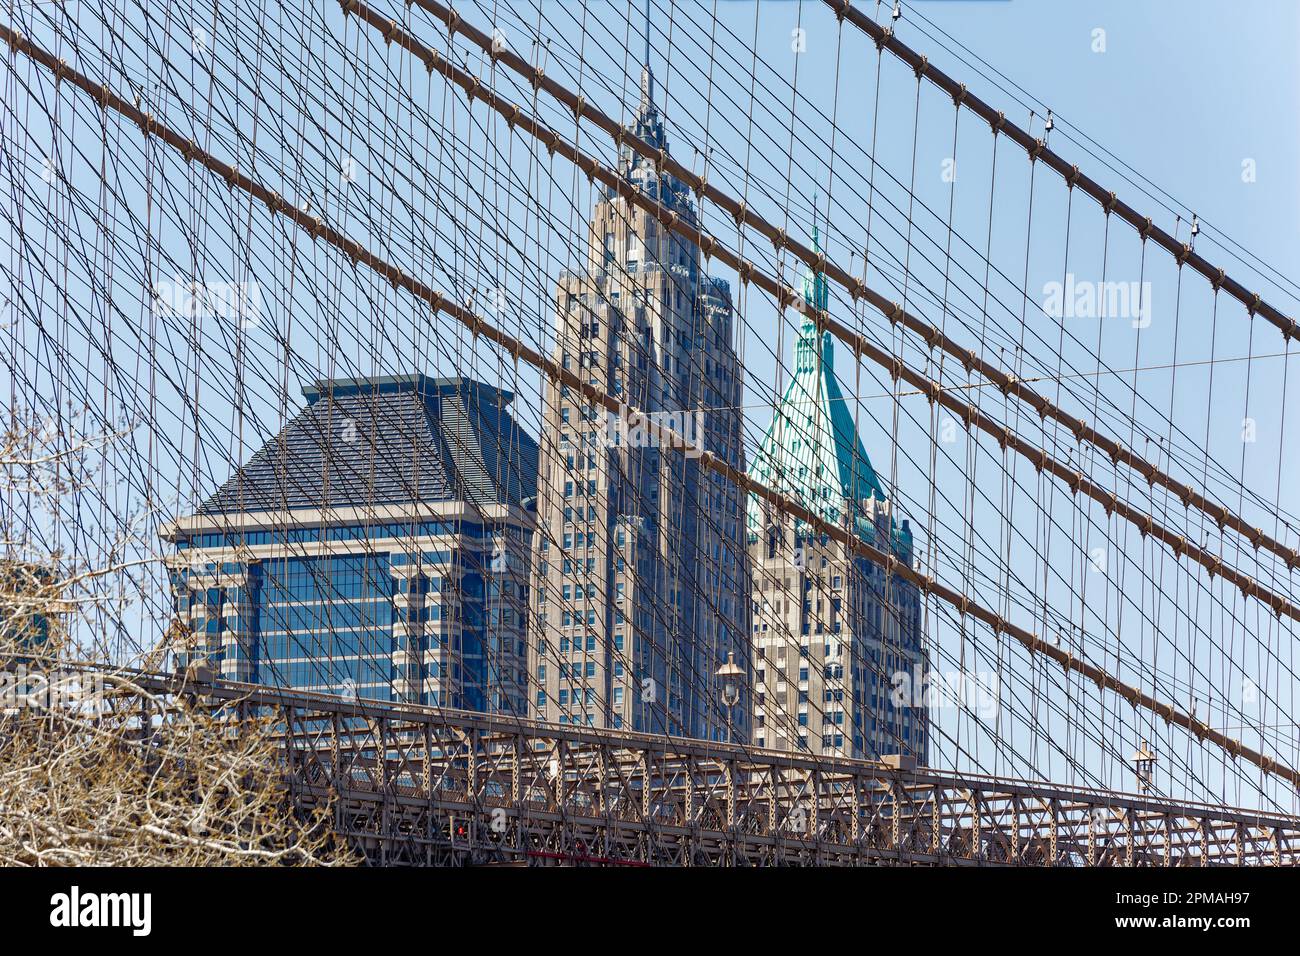 Cables and stays of the Brooklyn Bridge veil Financial District skyscrapers 60 Wall Street, 70 Pine Street, and 40 Wall Street. Stock Photo